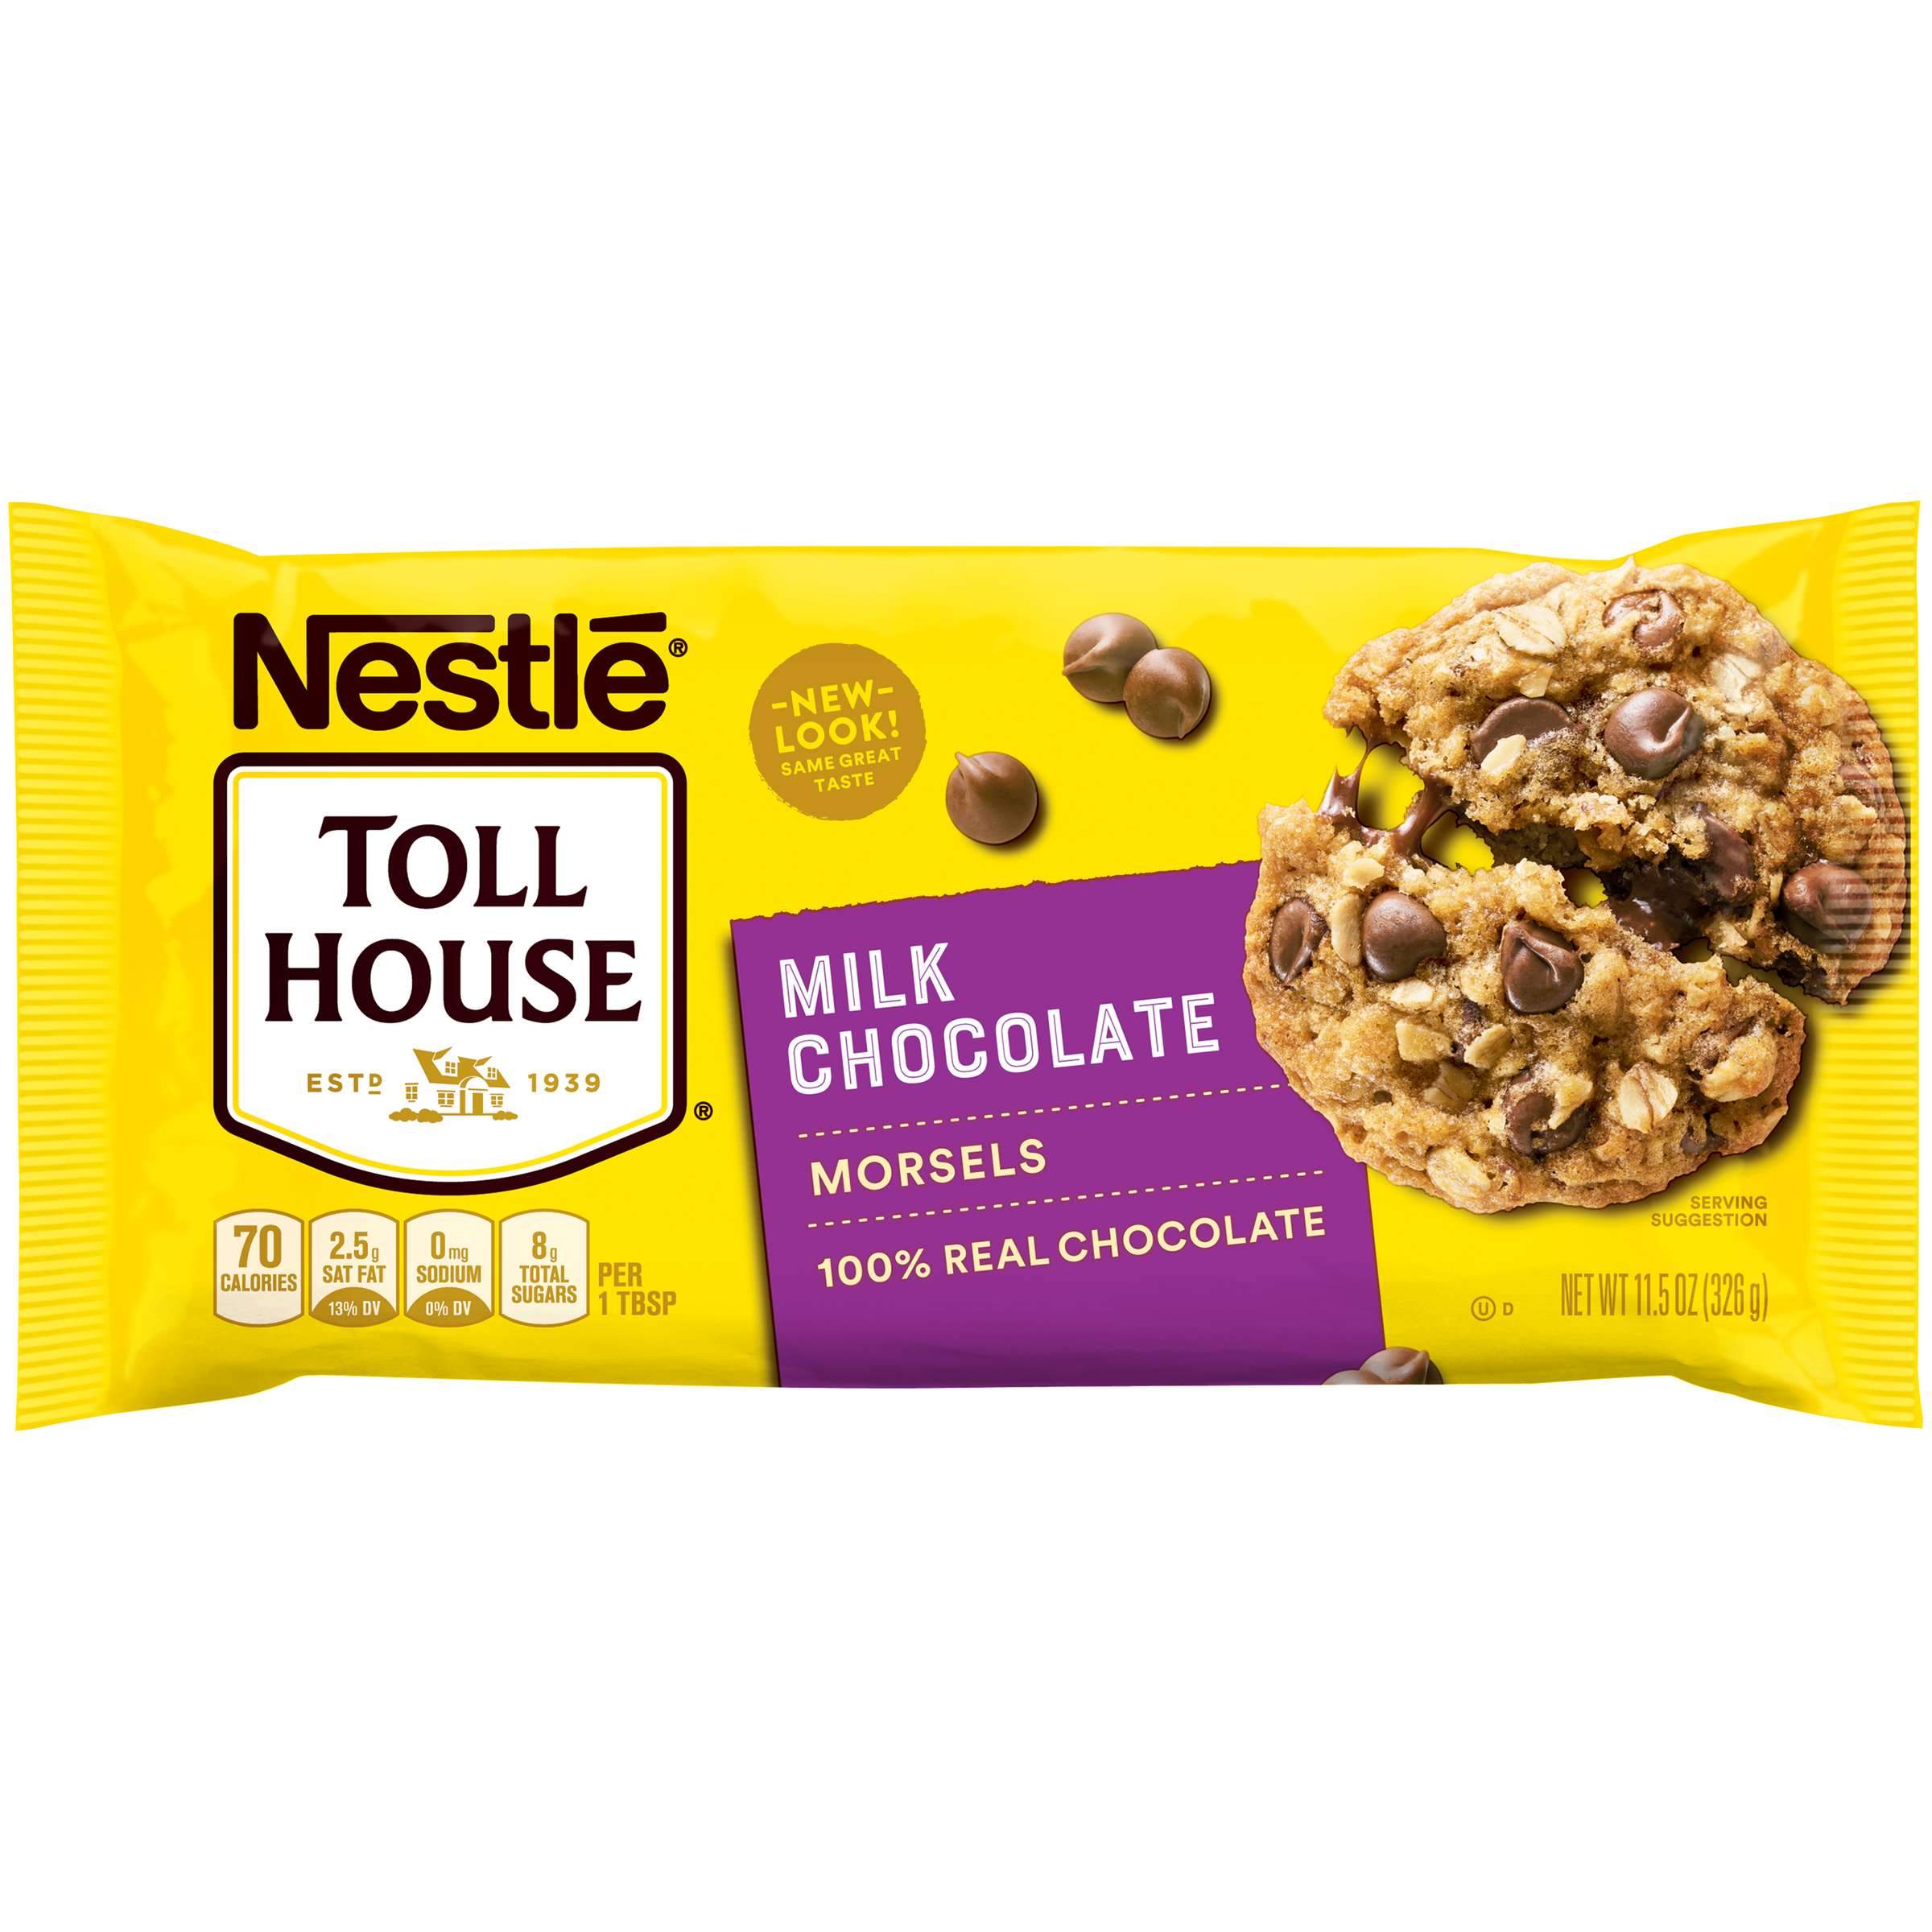 Nestlé Toll House Baking Morsels Toll House Milk Chocolate 11.5 Ounce 